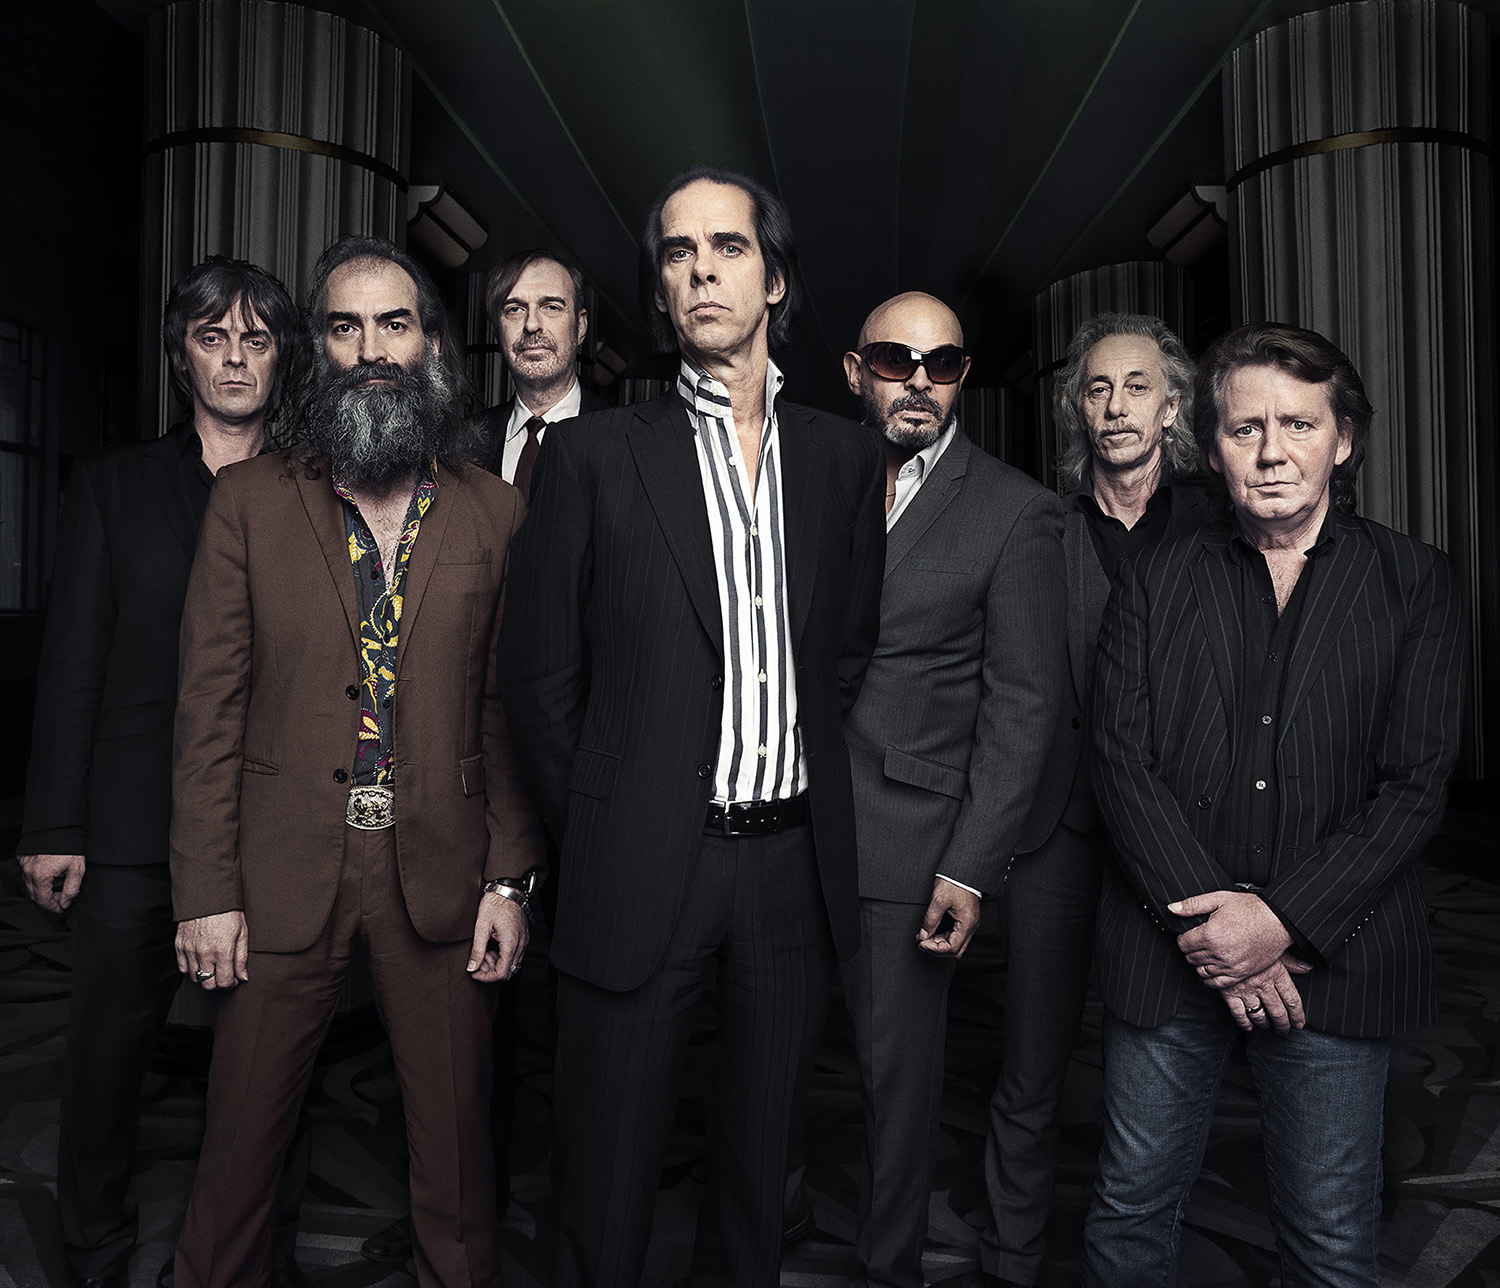 Nick Cave And The Bad Seeds HD wallpapers, Desktop wallpaper - most viewed